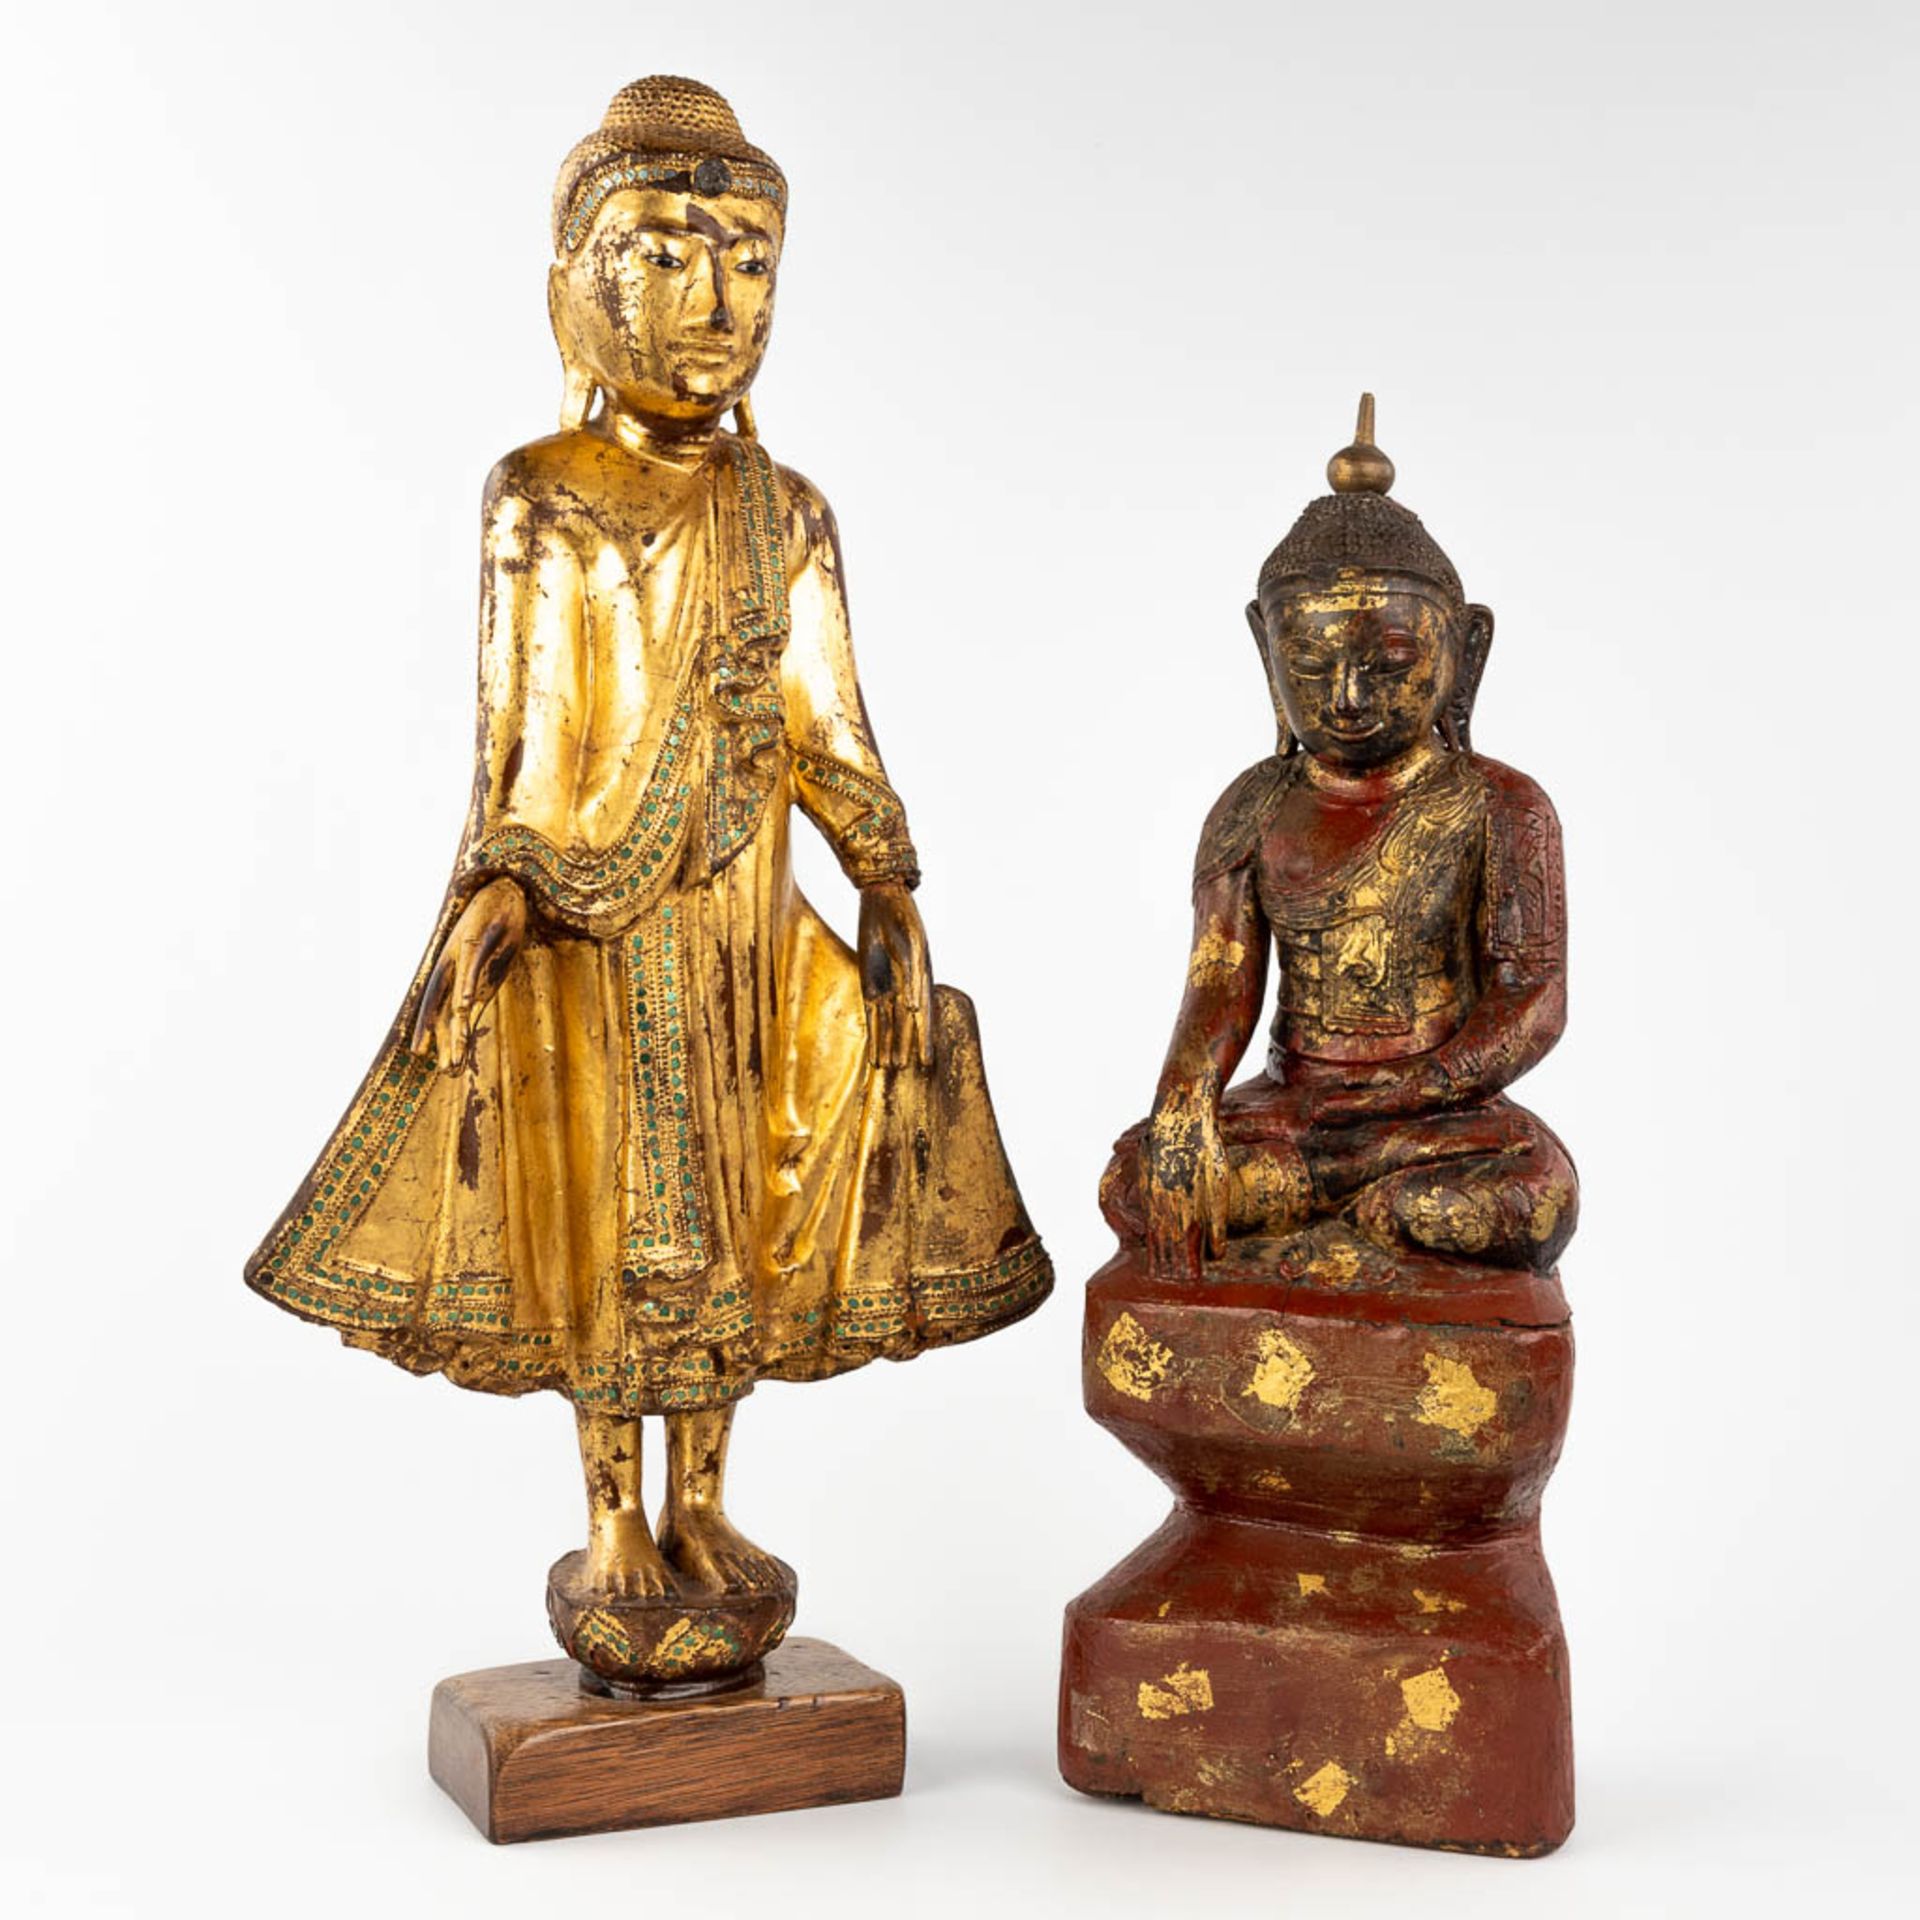 A collection of two wood-sculptured buddha statues, 19th/20th C. (W: 29 x H: 60 cm)